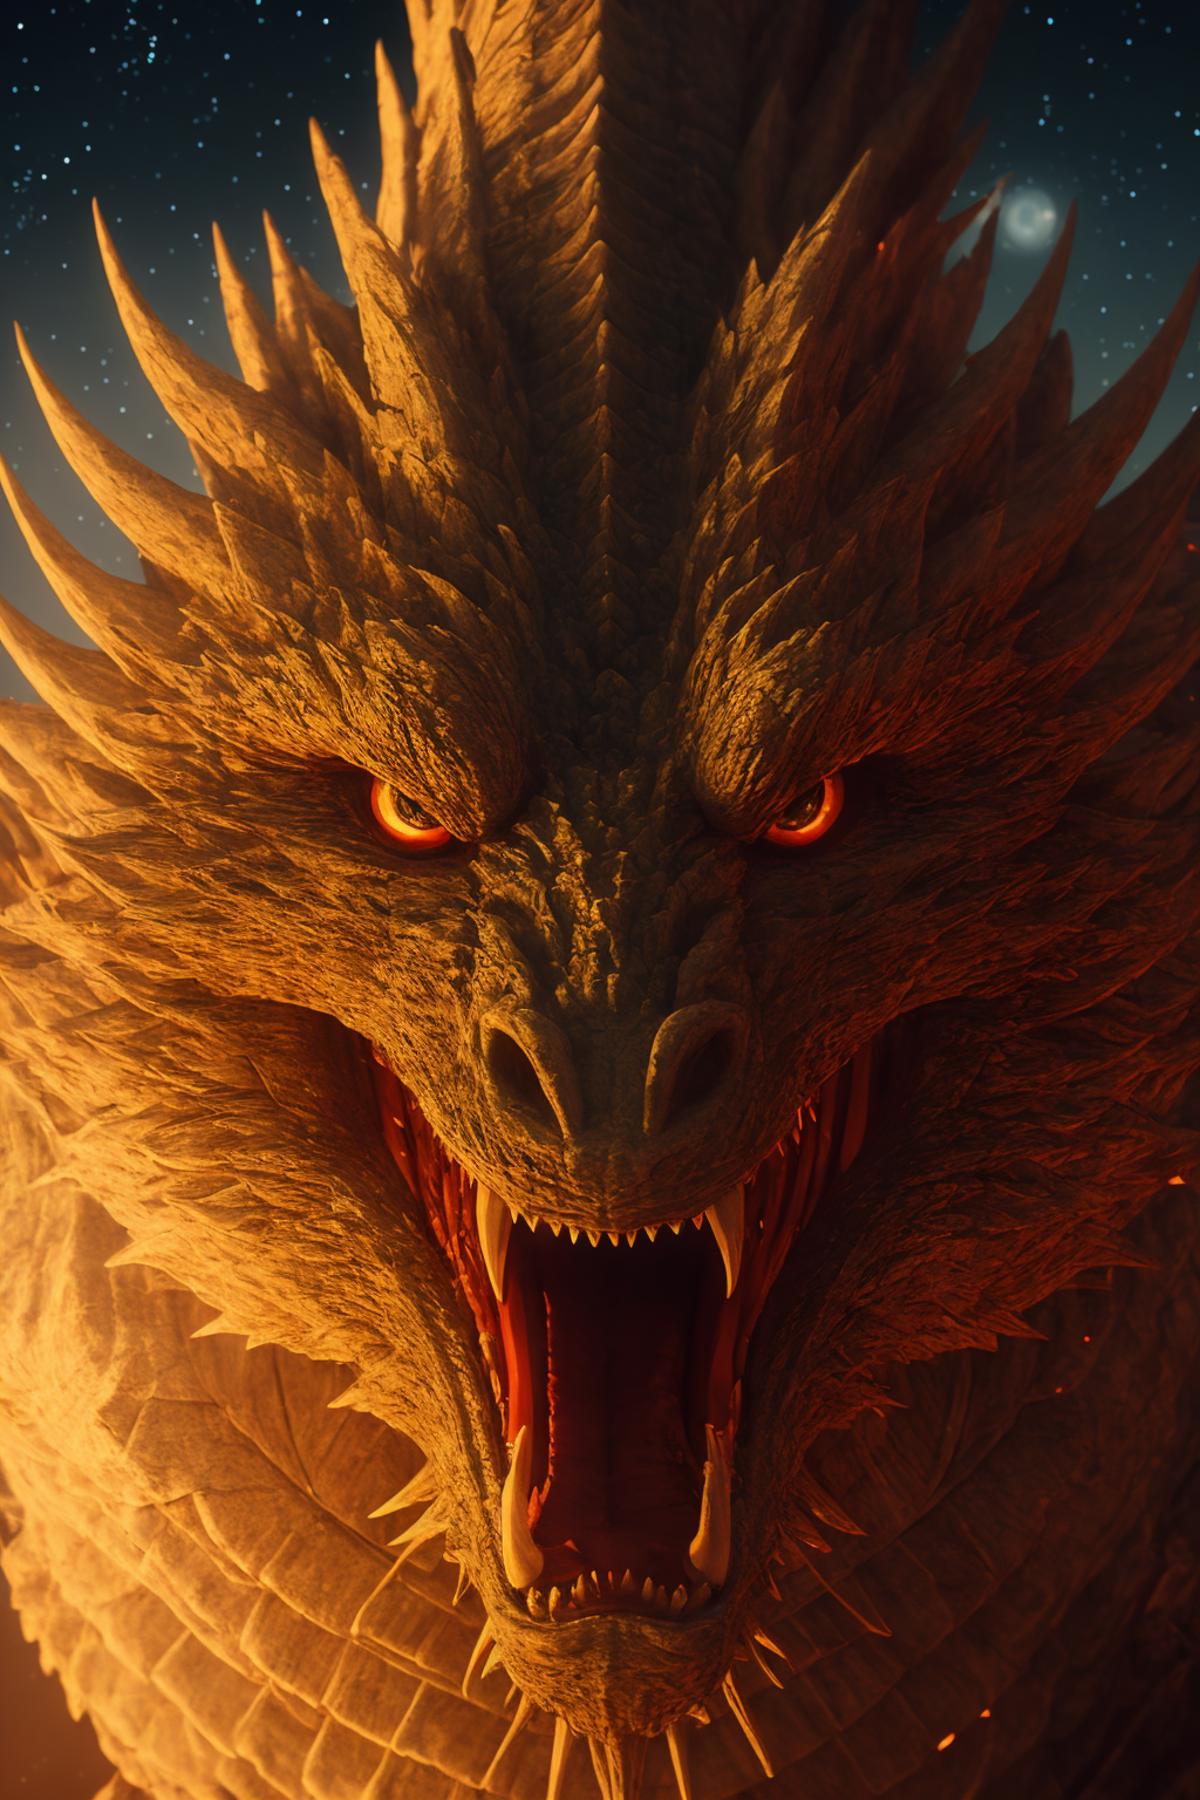 Real dragons 真实龙 image by GreatBizarro